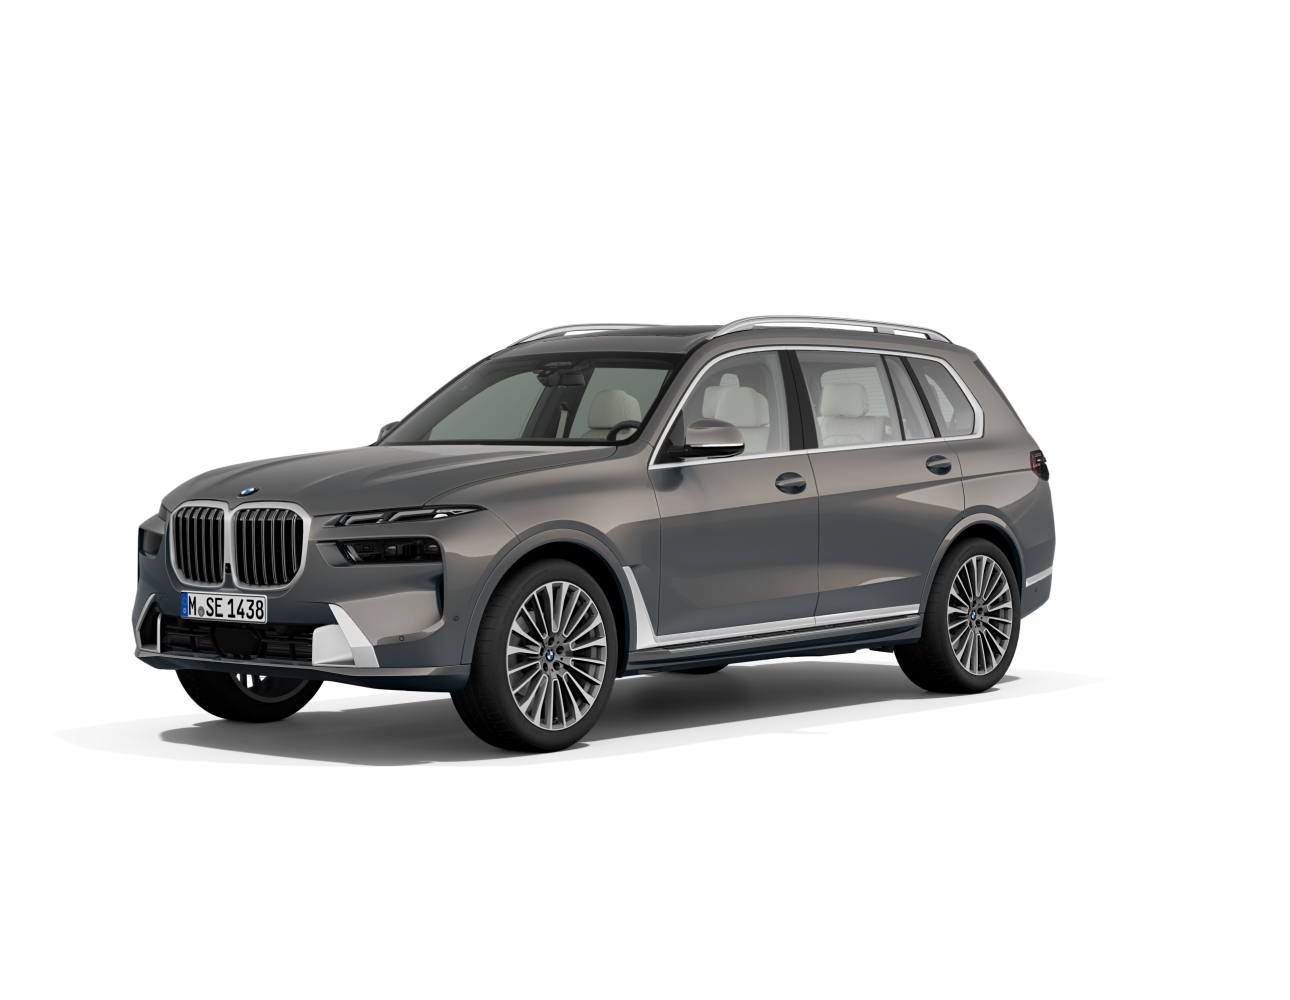 Bmw x7 xdrive40i 7 seater pure excellence front side